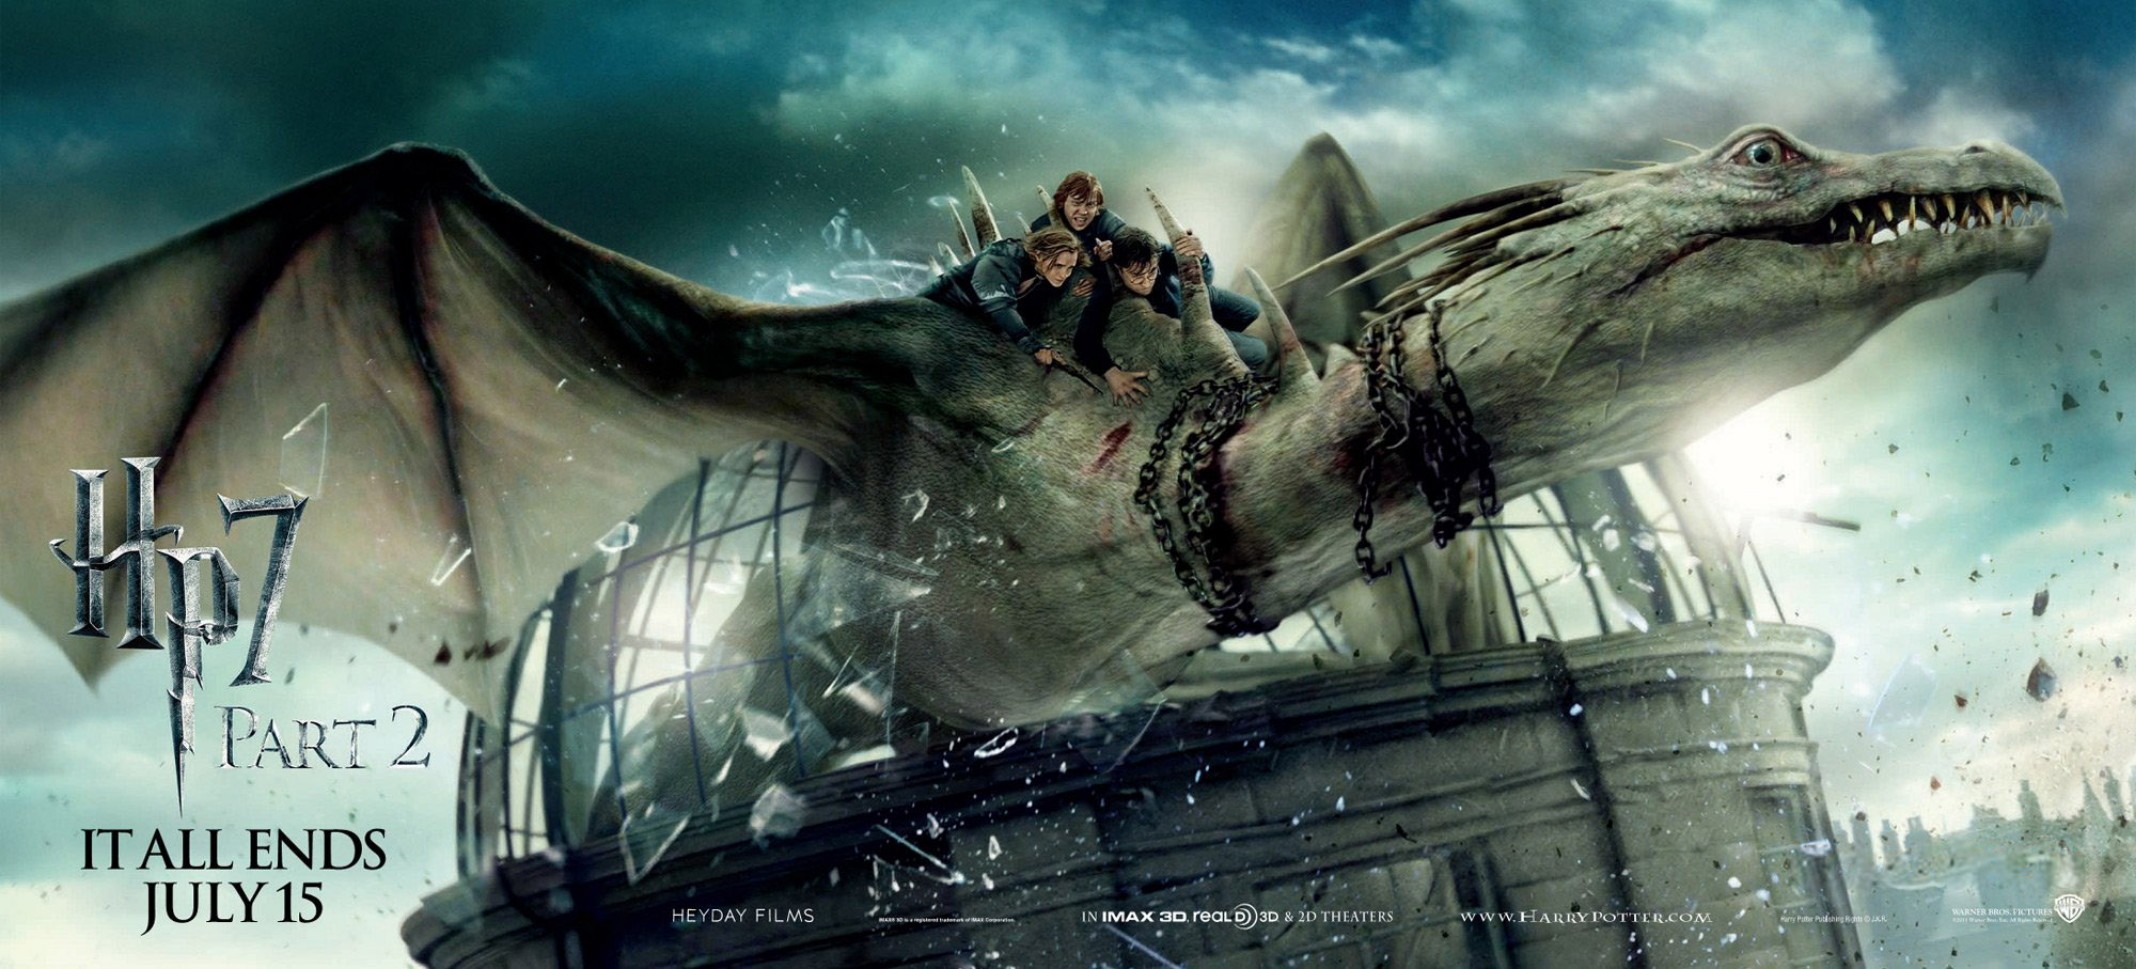 Mega Sized Movie Poster Image for Harry Potter and the Deathly Hallows: Part 2 (#23 of 28)